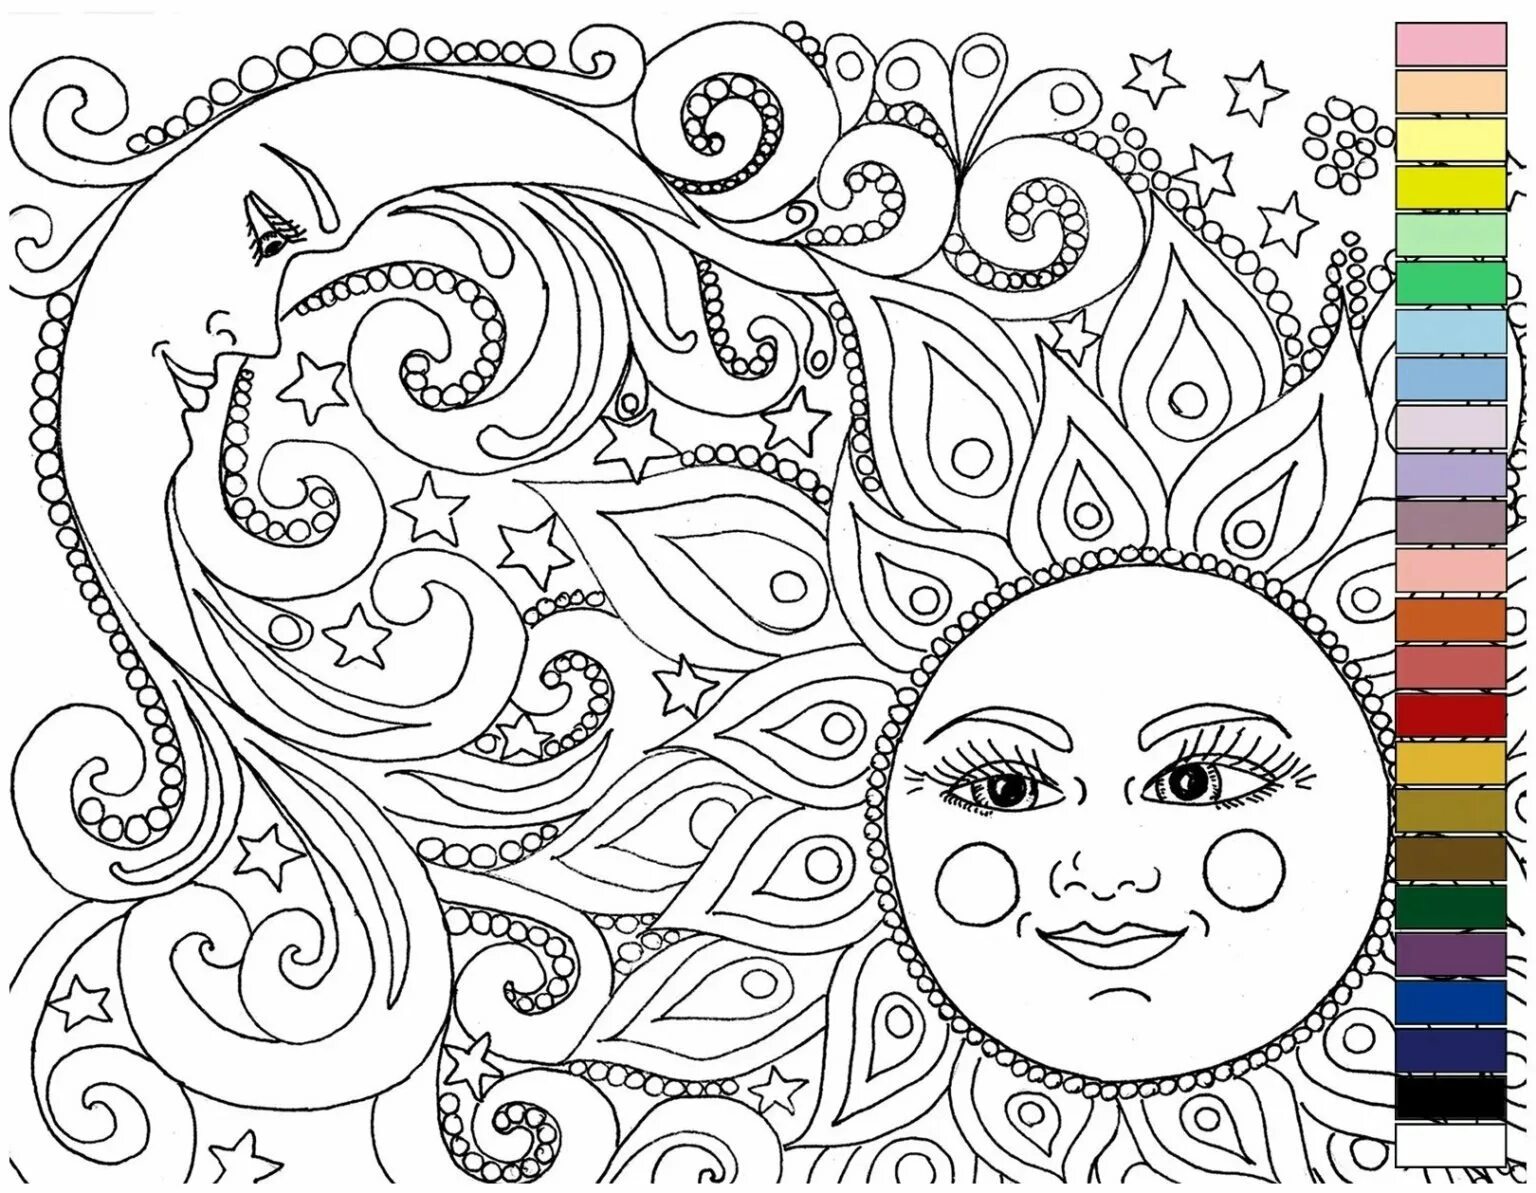 Coloring art therapy for struggling students